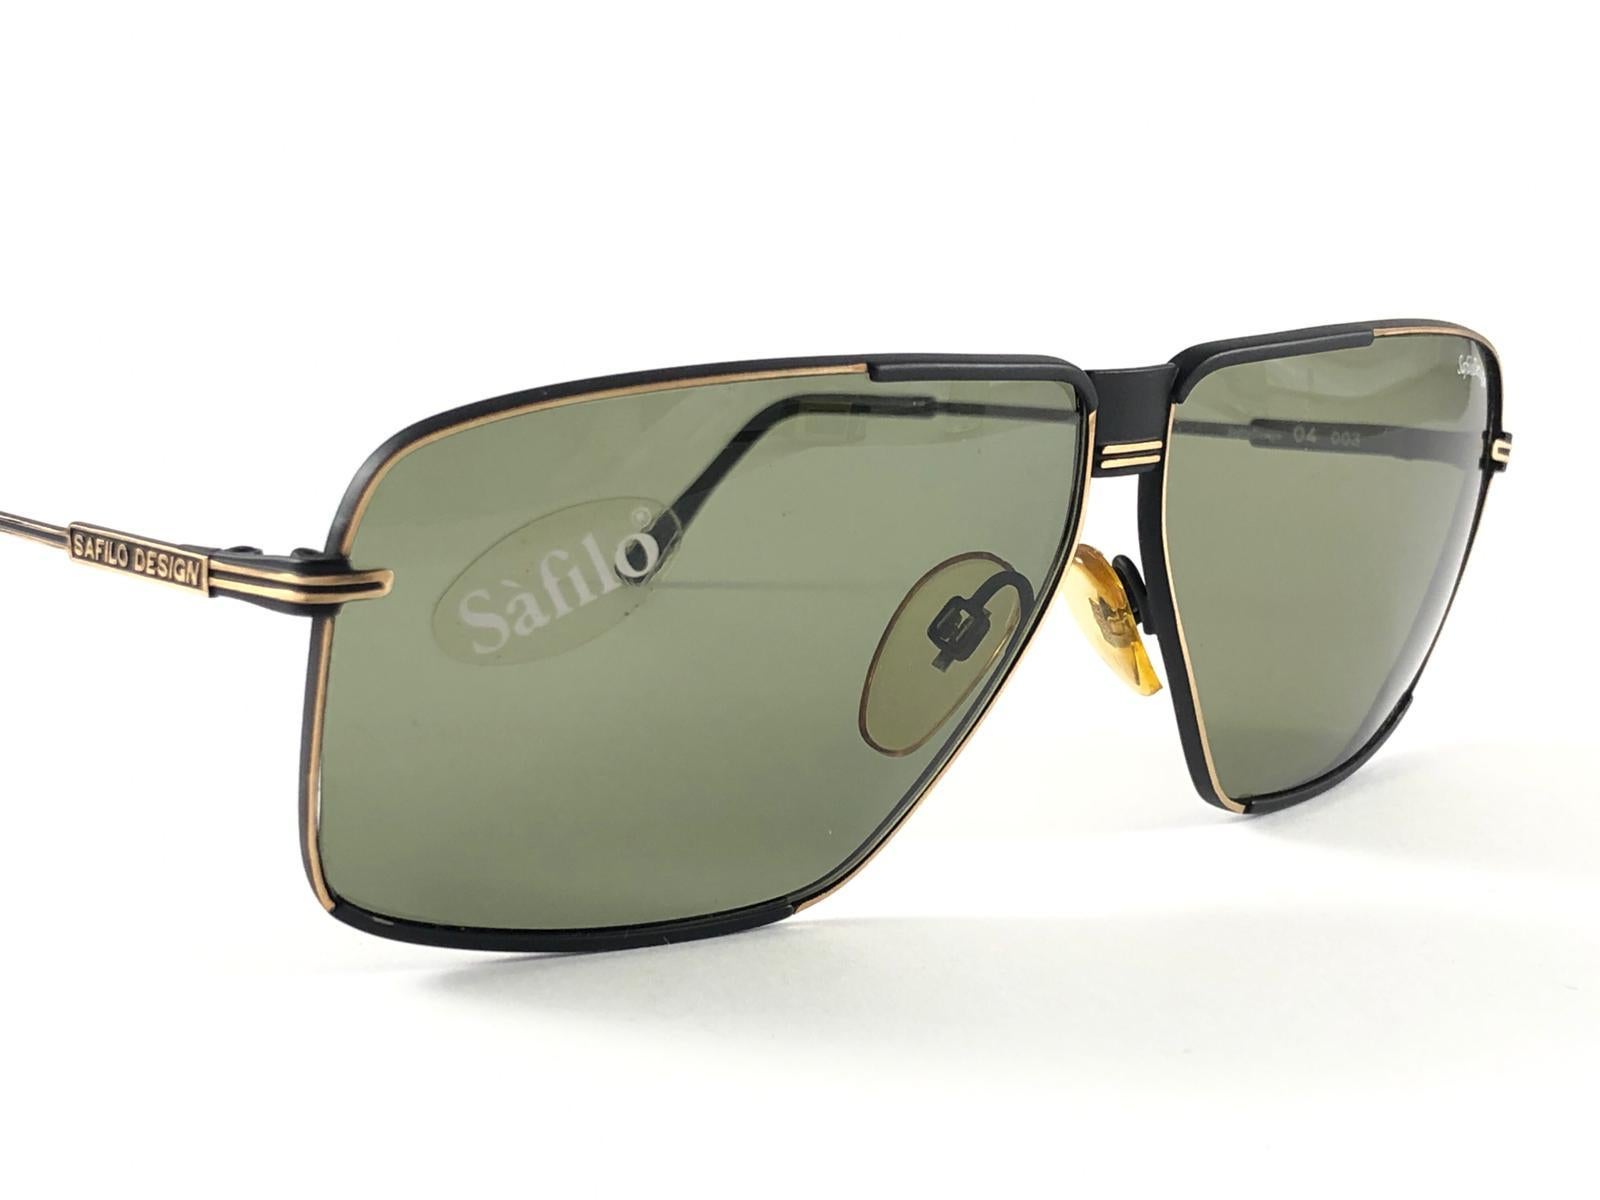 New Vintage Safilo Design 04 Black Mate Aviator 1980's Sunglasses Made in Italy In New Condition For Sale In Baleares, Baleares